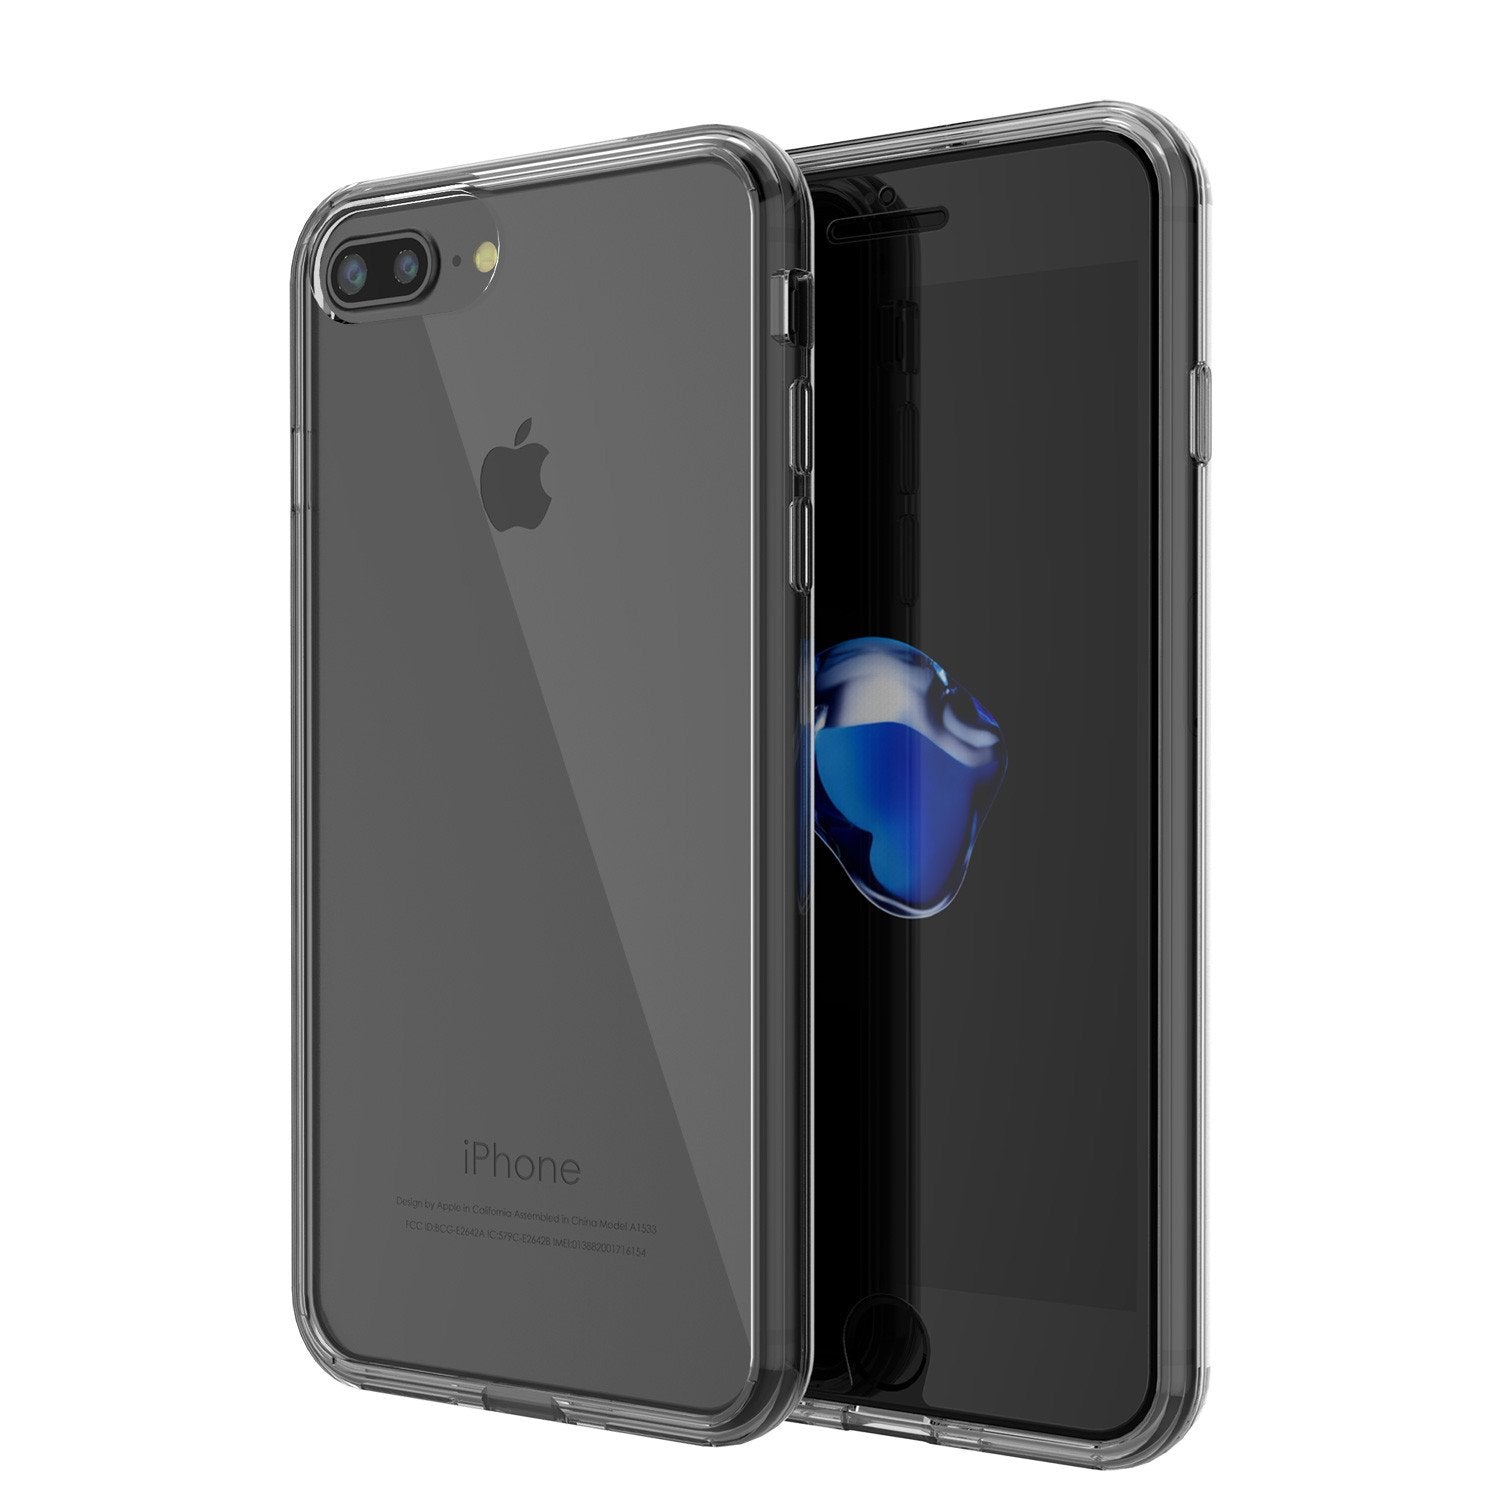 iPhone 7 Case Punkcase® LUCID 2.0 Crystal Black Series w/ PUNK SHIELD Screen Protector | Ultra Fit - PunkCase NZ